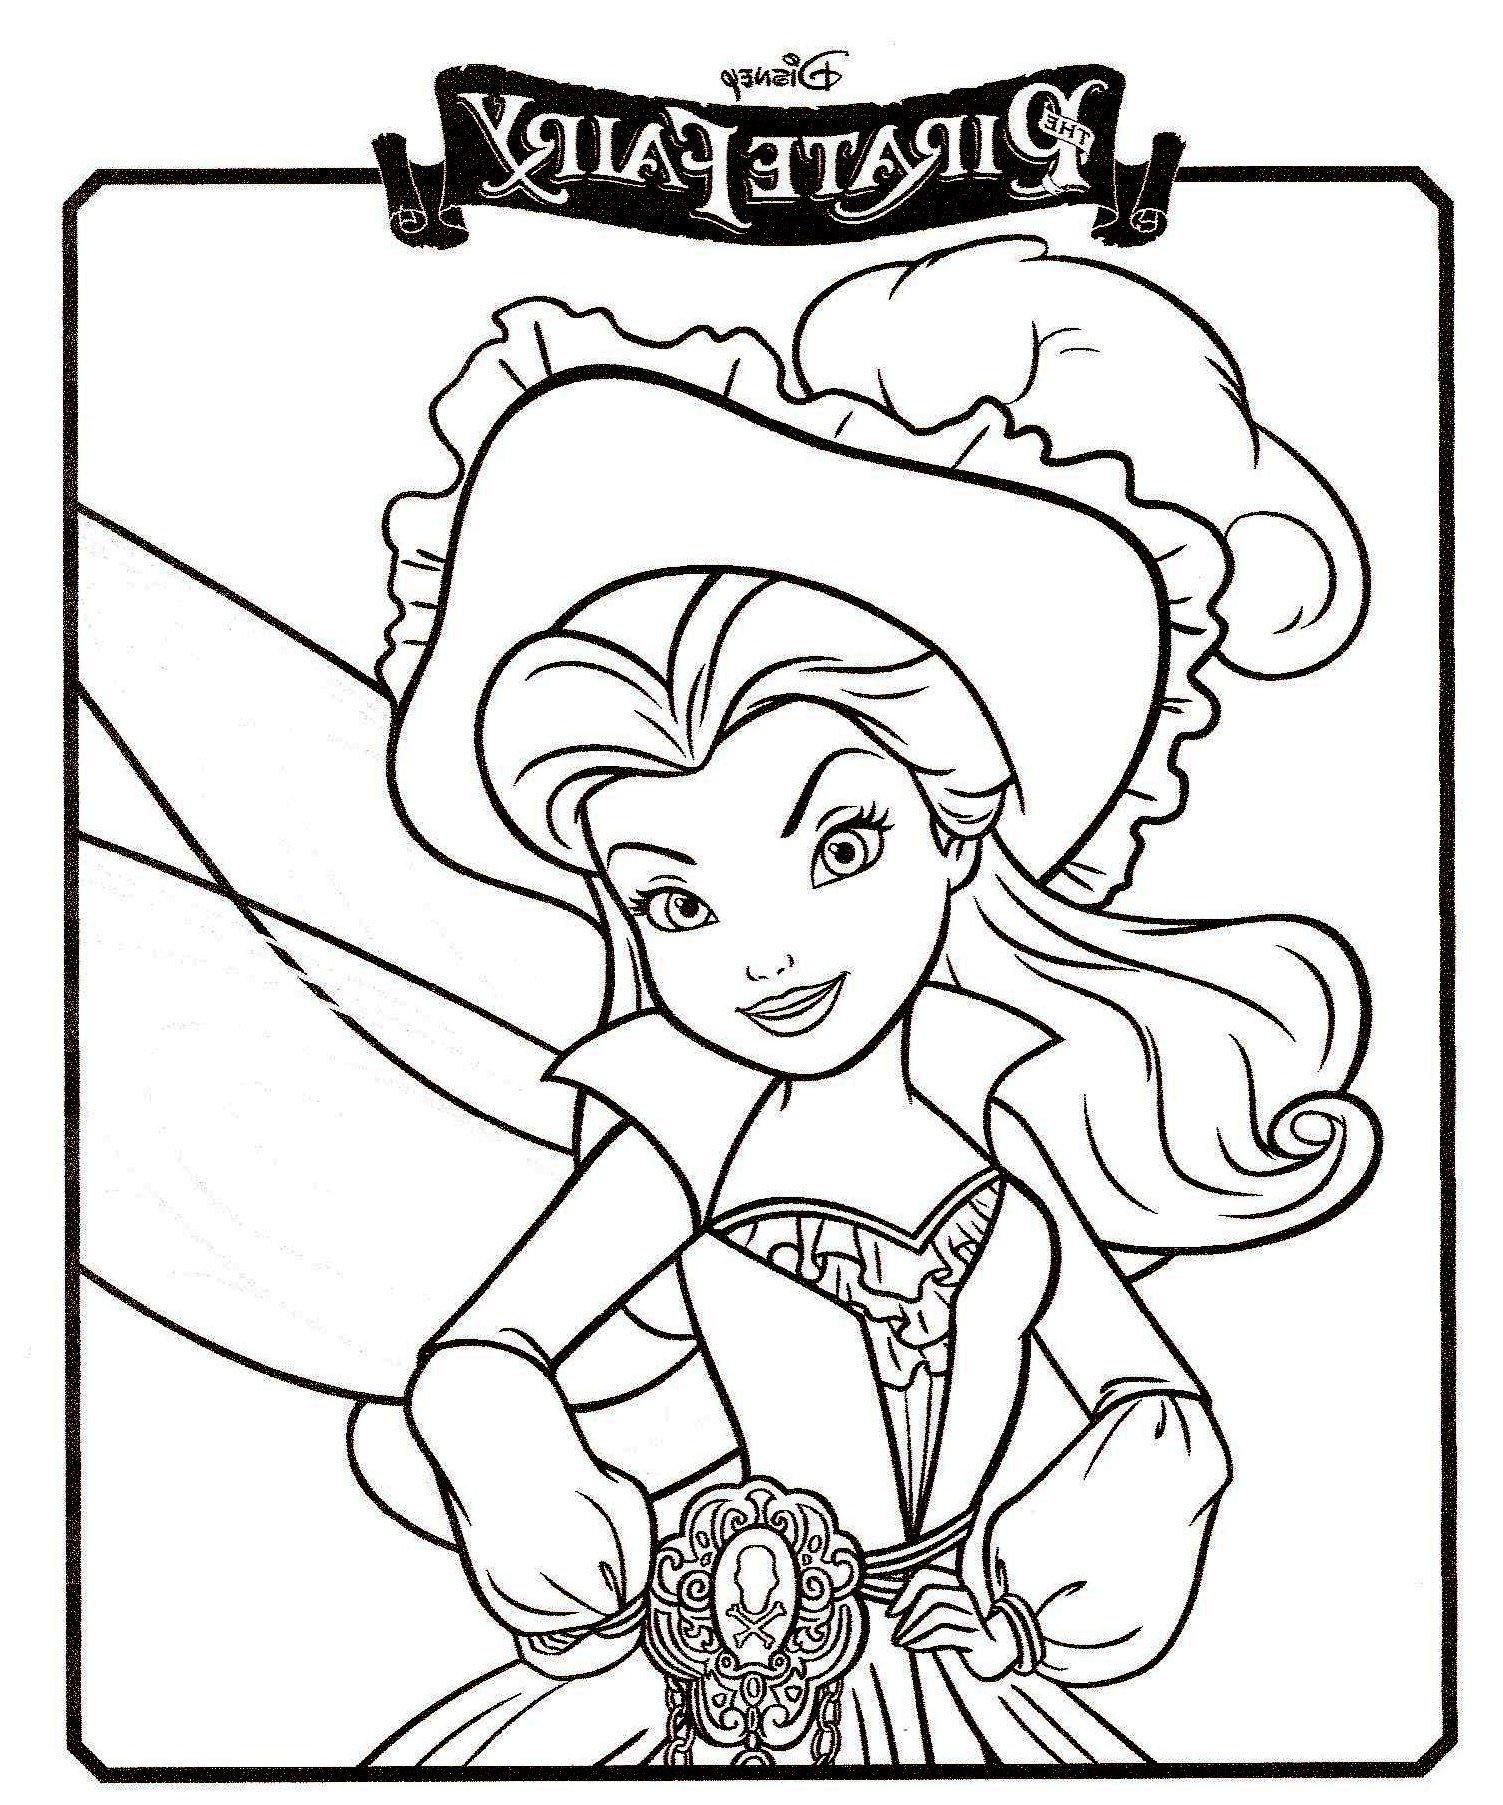 Coloriage Pirate Beau Collection Coloriage Pirate